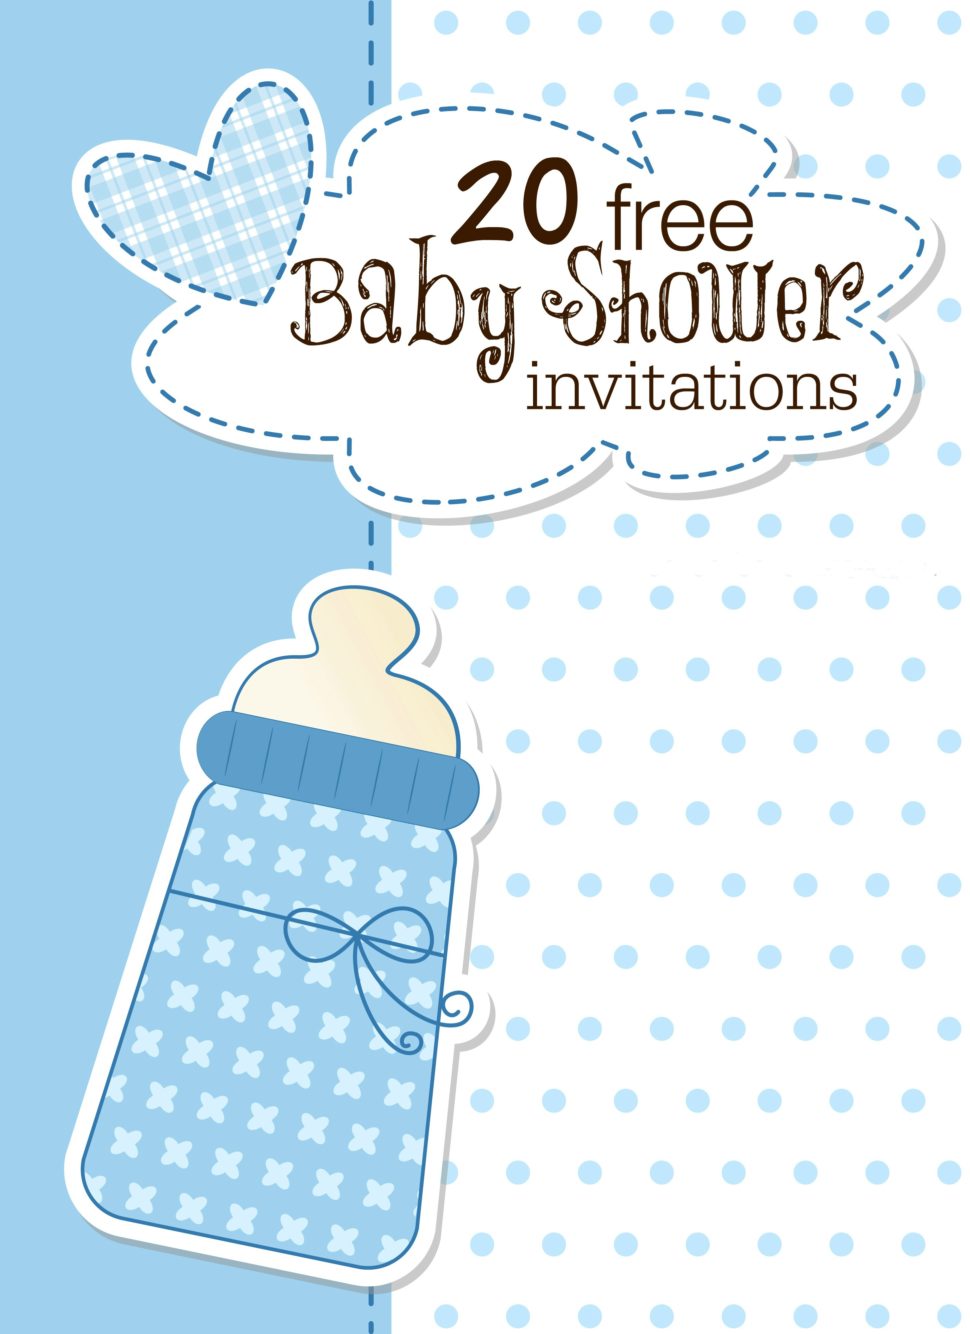 Medium Size of Baby Shower:unique Baby Shower Ideas Pinterest Baby Shower Ideas For Girls Baby Girl Themes For Bedroom Unique Baby Shower Decorations Nautical Baby Shower Invitations For Boys Baby Girl Themes For Bedroom Baby Shower Ideas Baby Shower Decorations Themes For Baby Girl Nursery